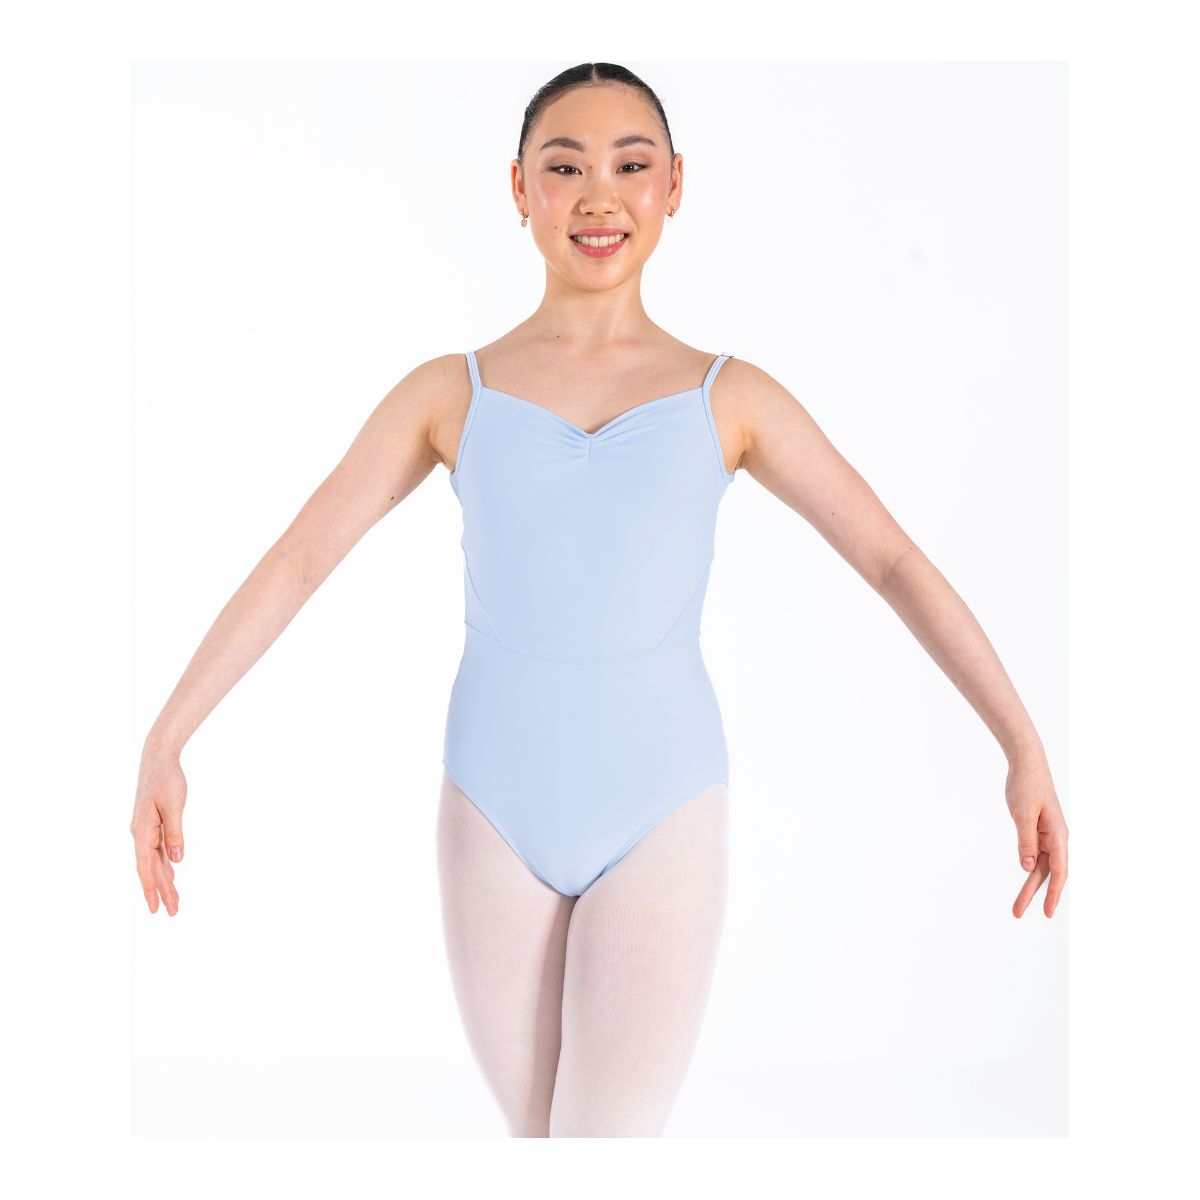 Dancer is wearing an ice blue Odette leotard which features a sweetheart pleated neckline, supportive double back strap and detailed bodice